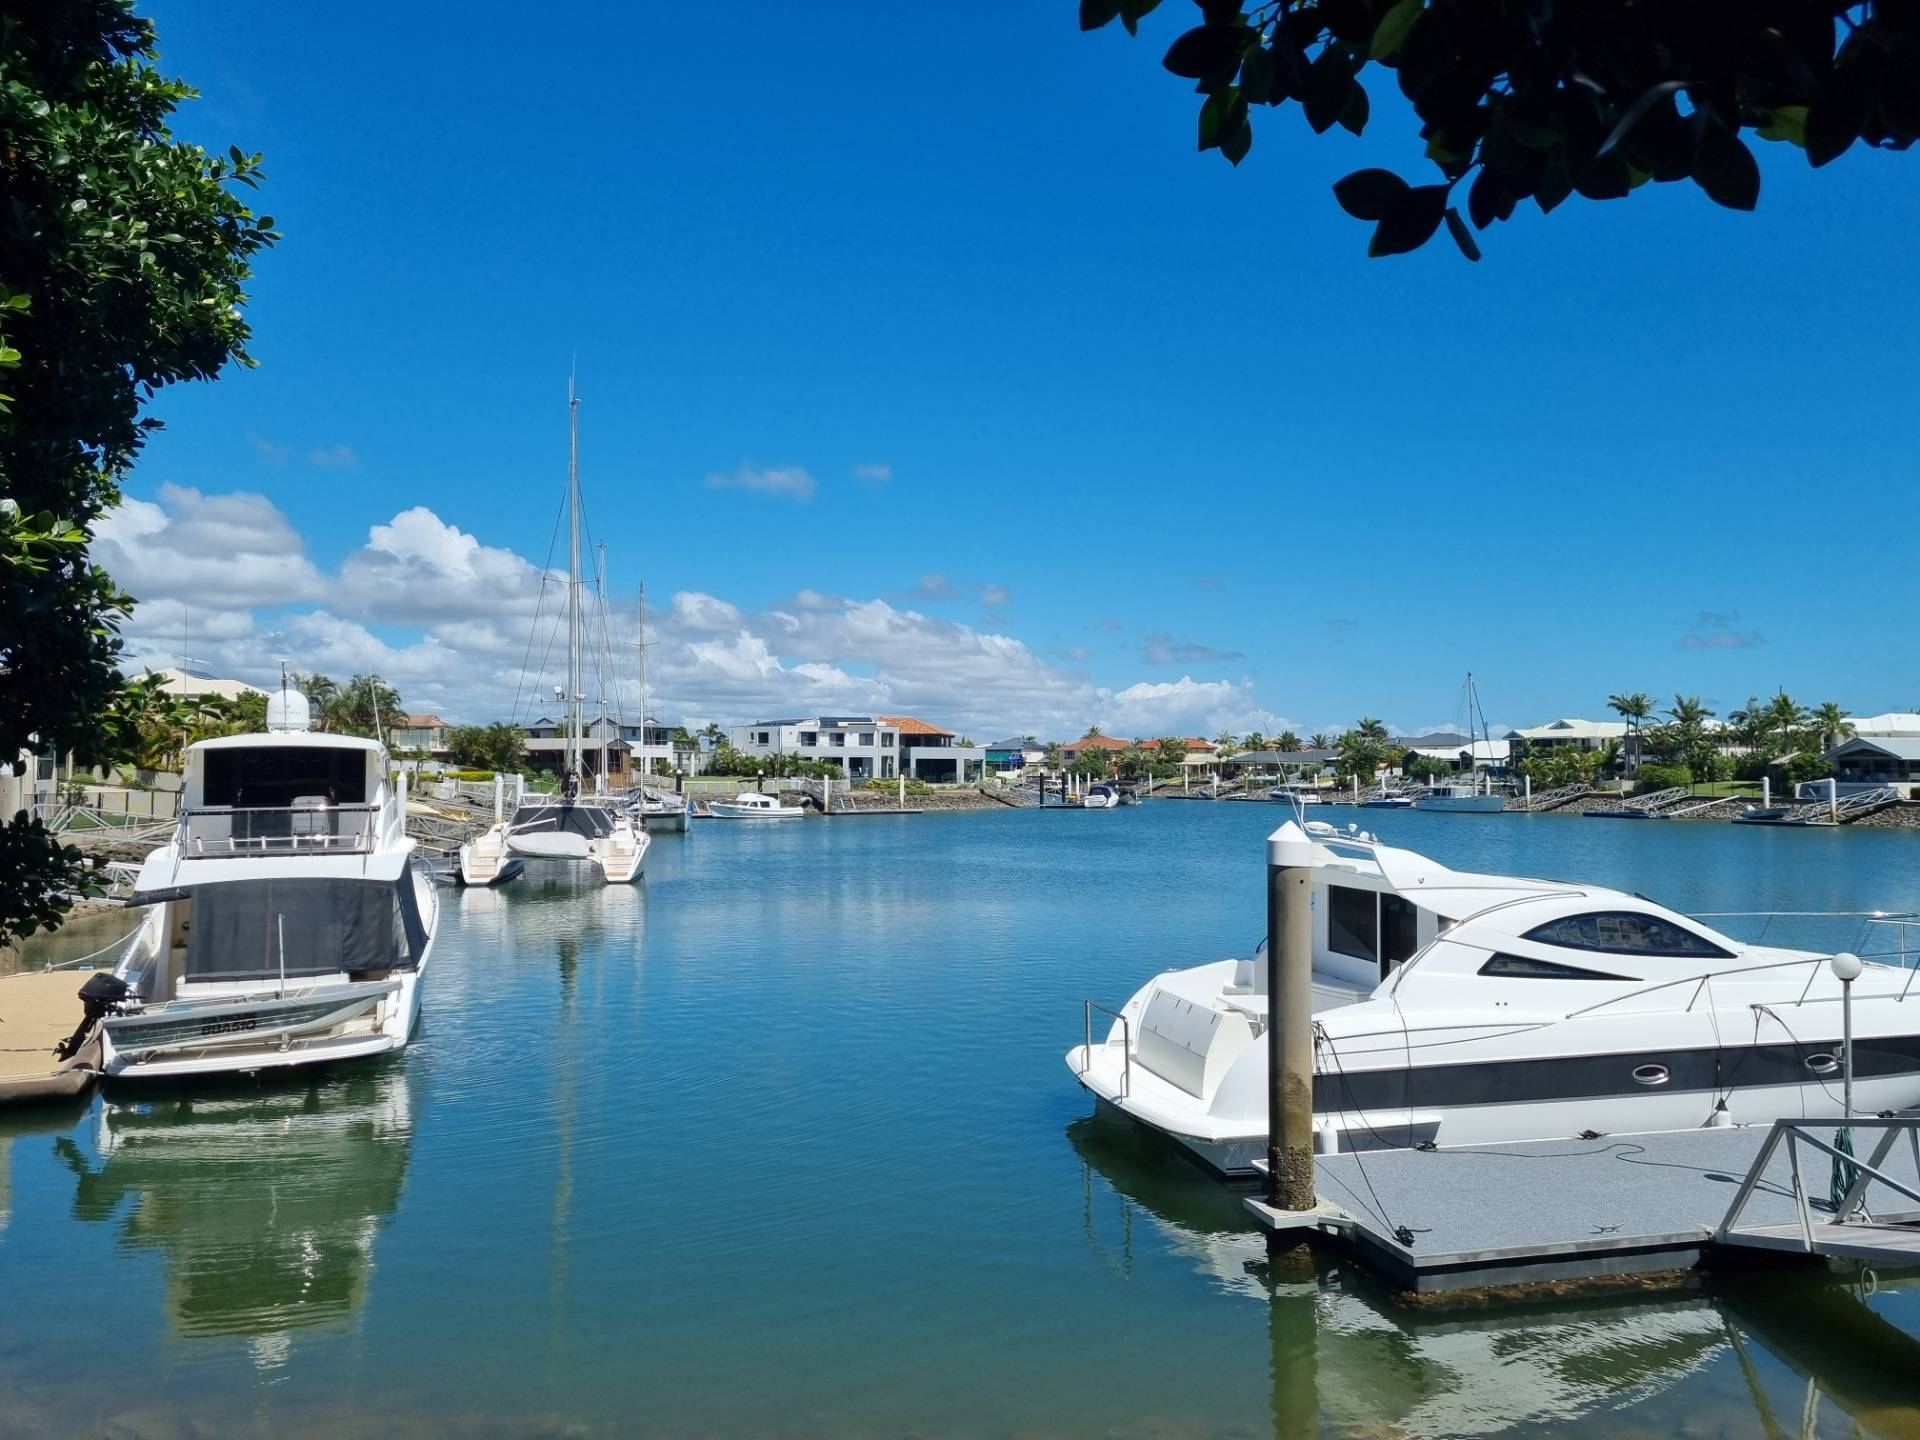 Raby Bay is right next door to Cleveland. It’s a man-made estate based around a series of specially made canals that locals now park their boats in.